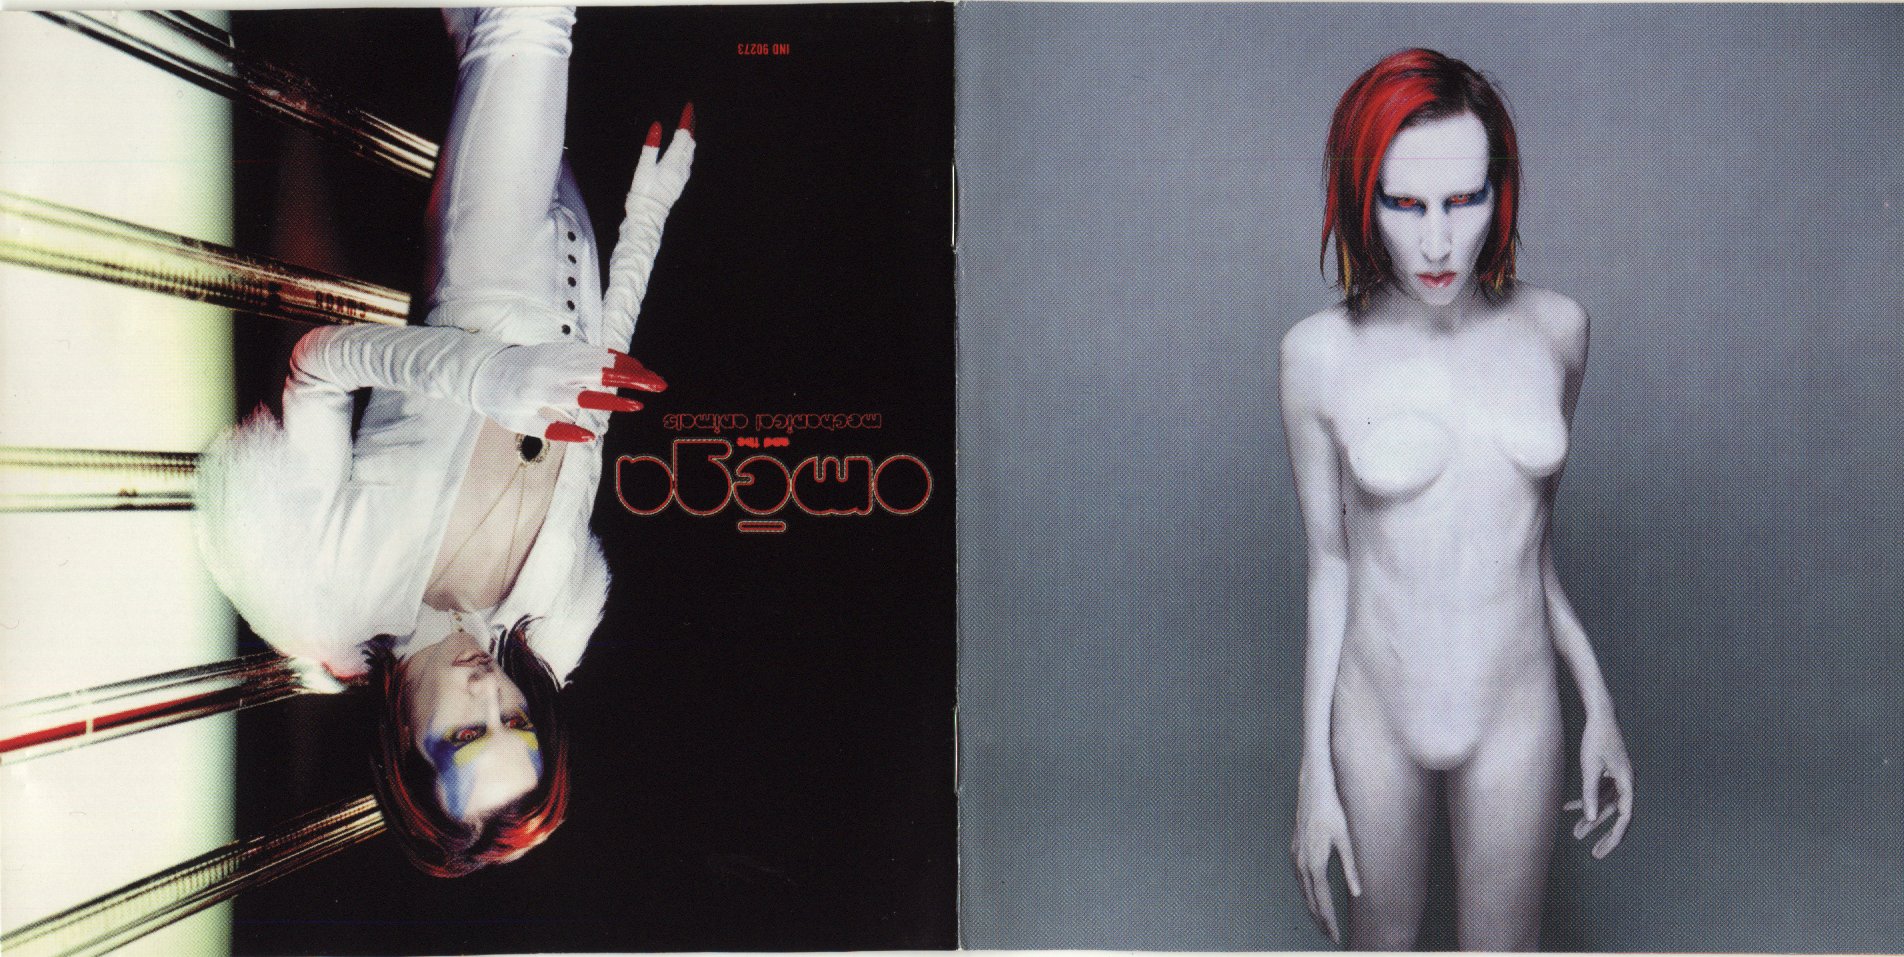 Marilyn Manson - Mechanical Animals (1998) - front back.